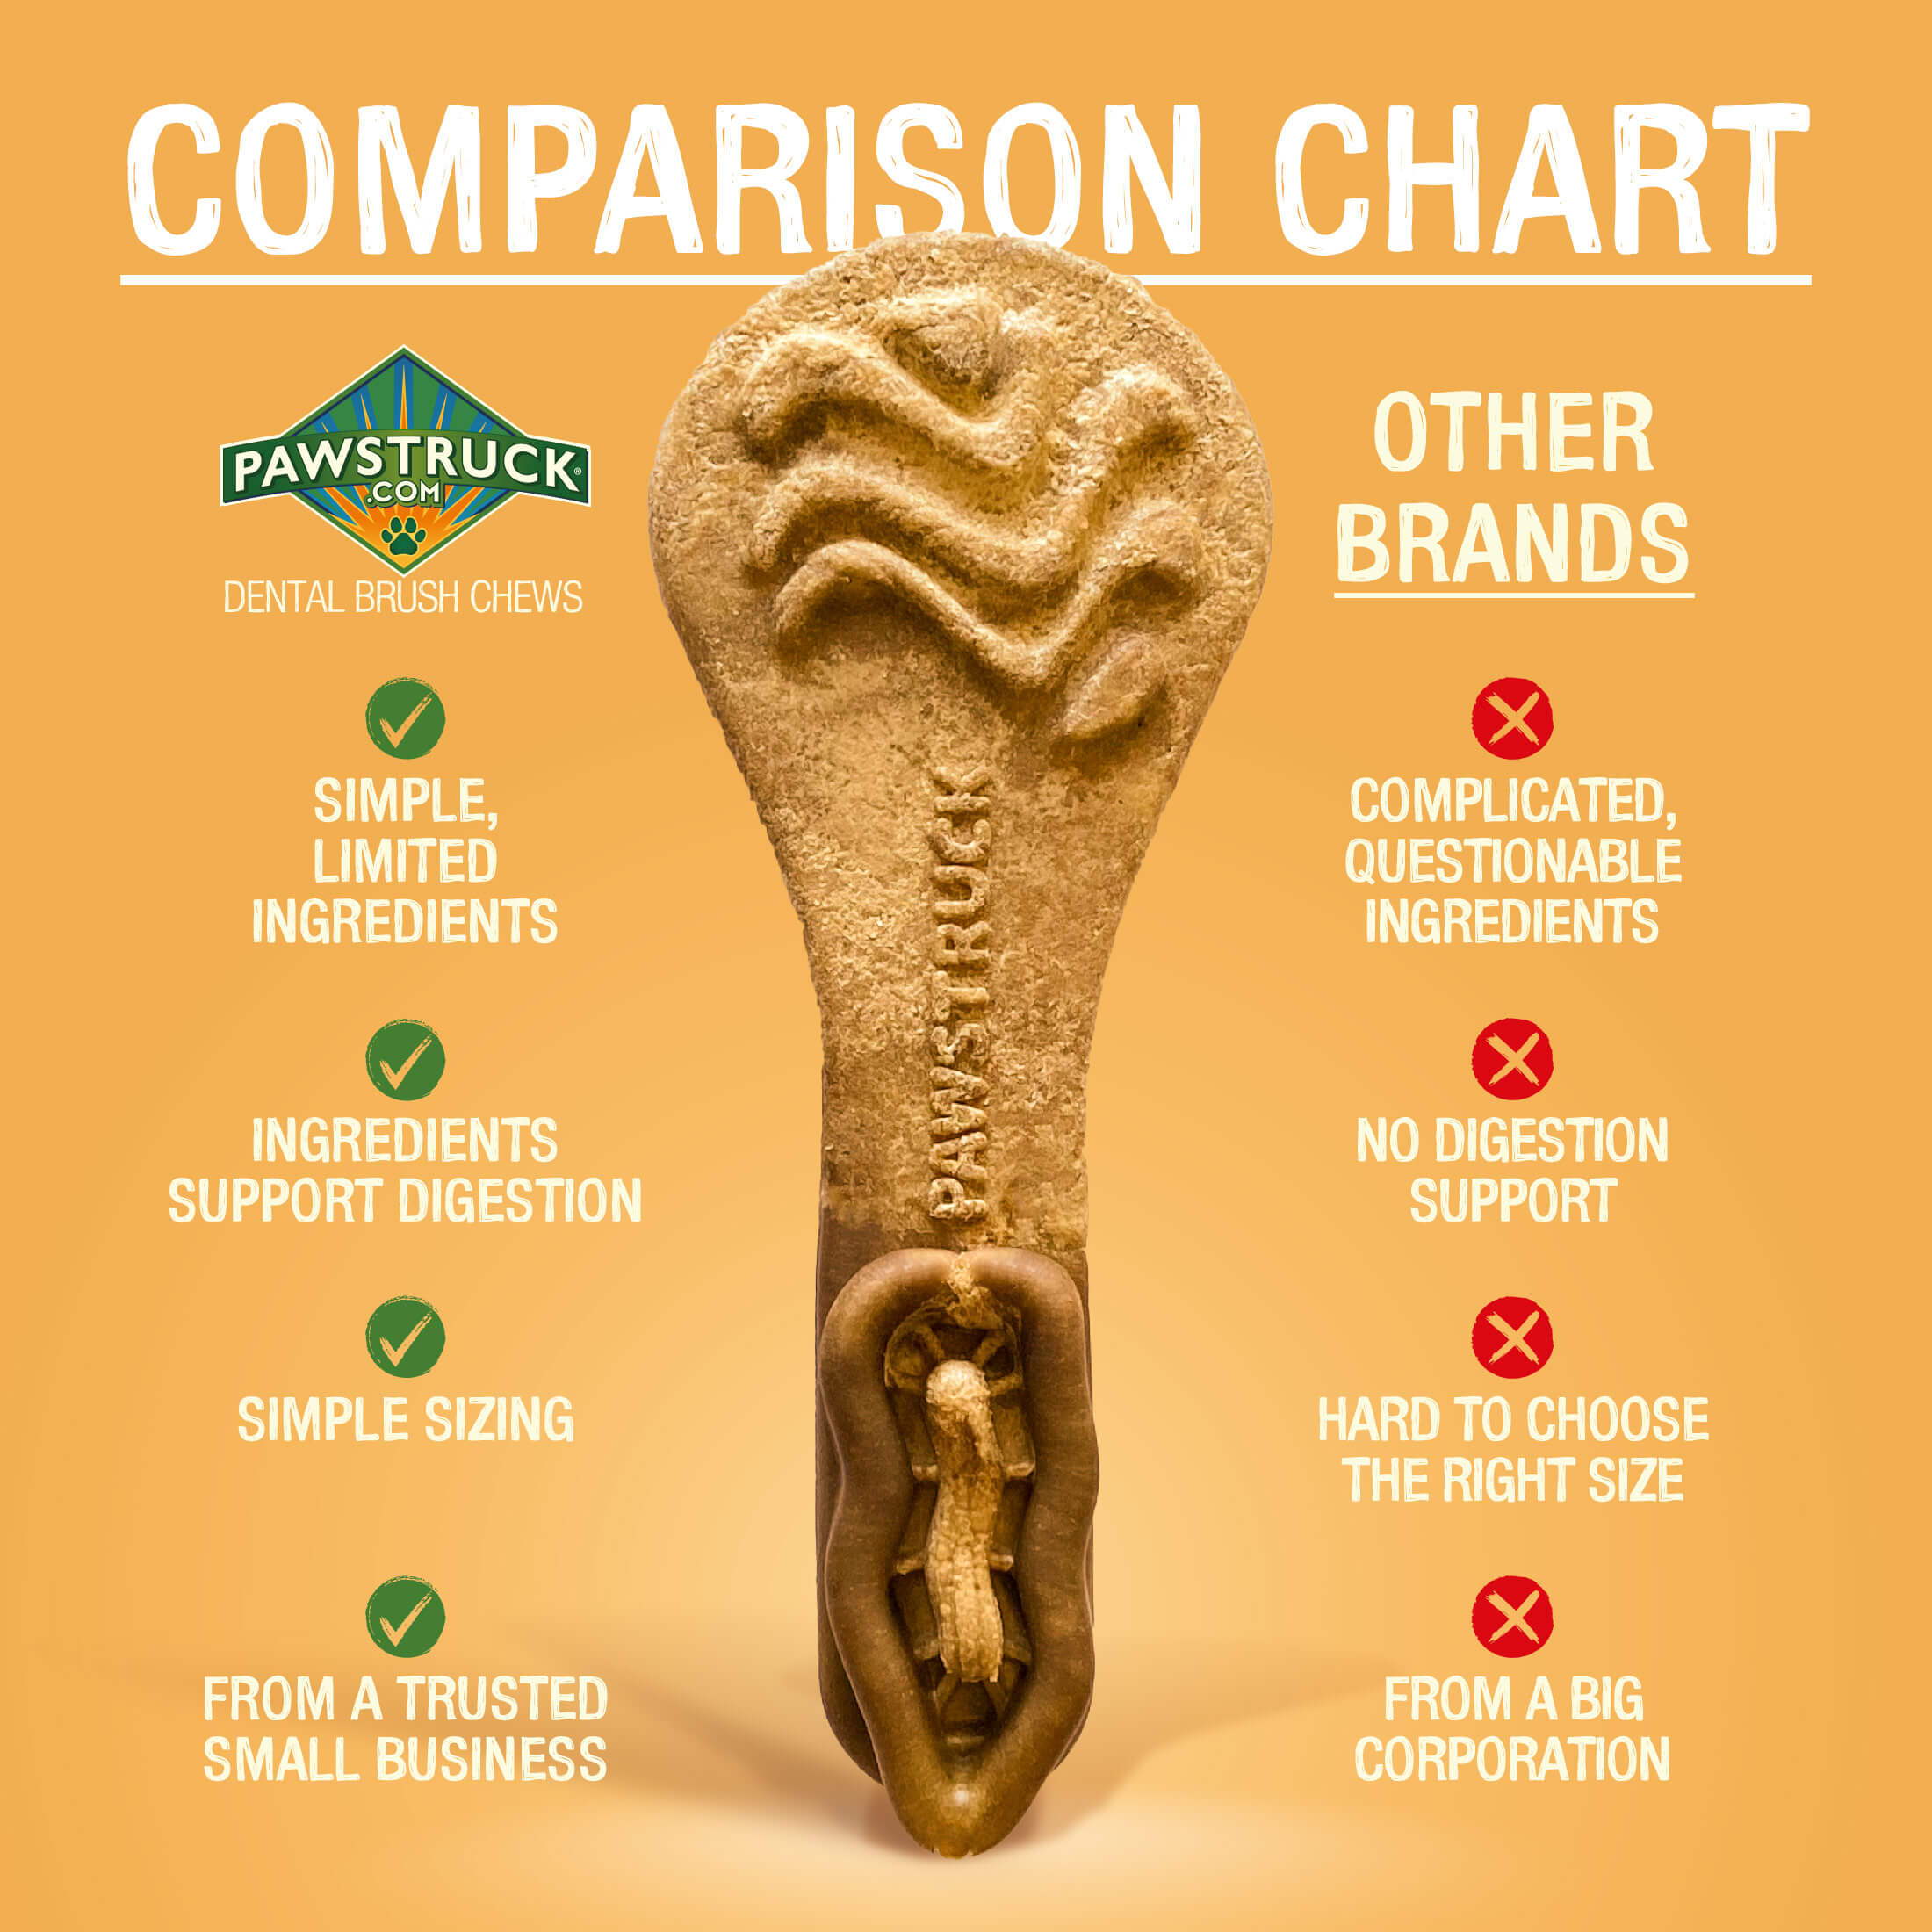 Comparison chart of Pawstruck Dental chews to Other Brands